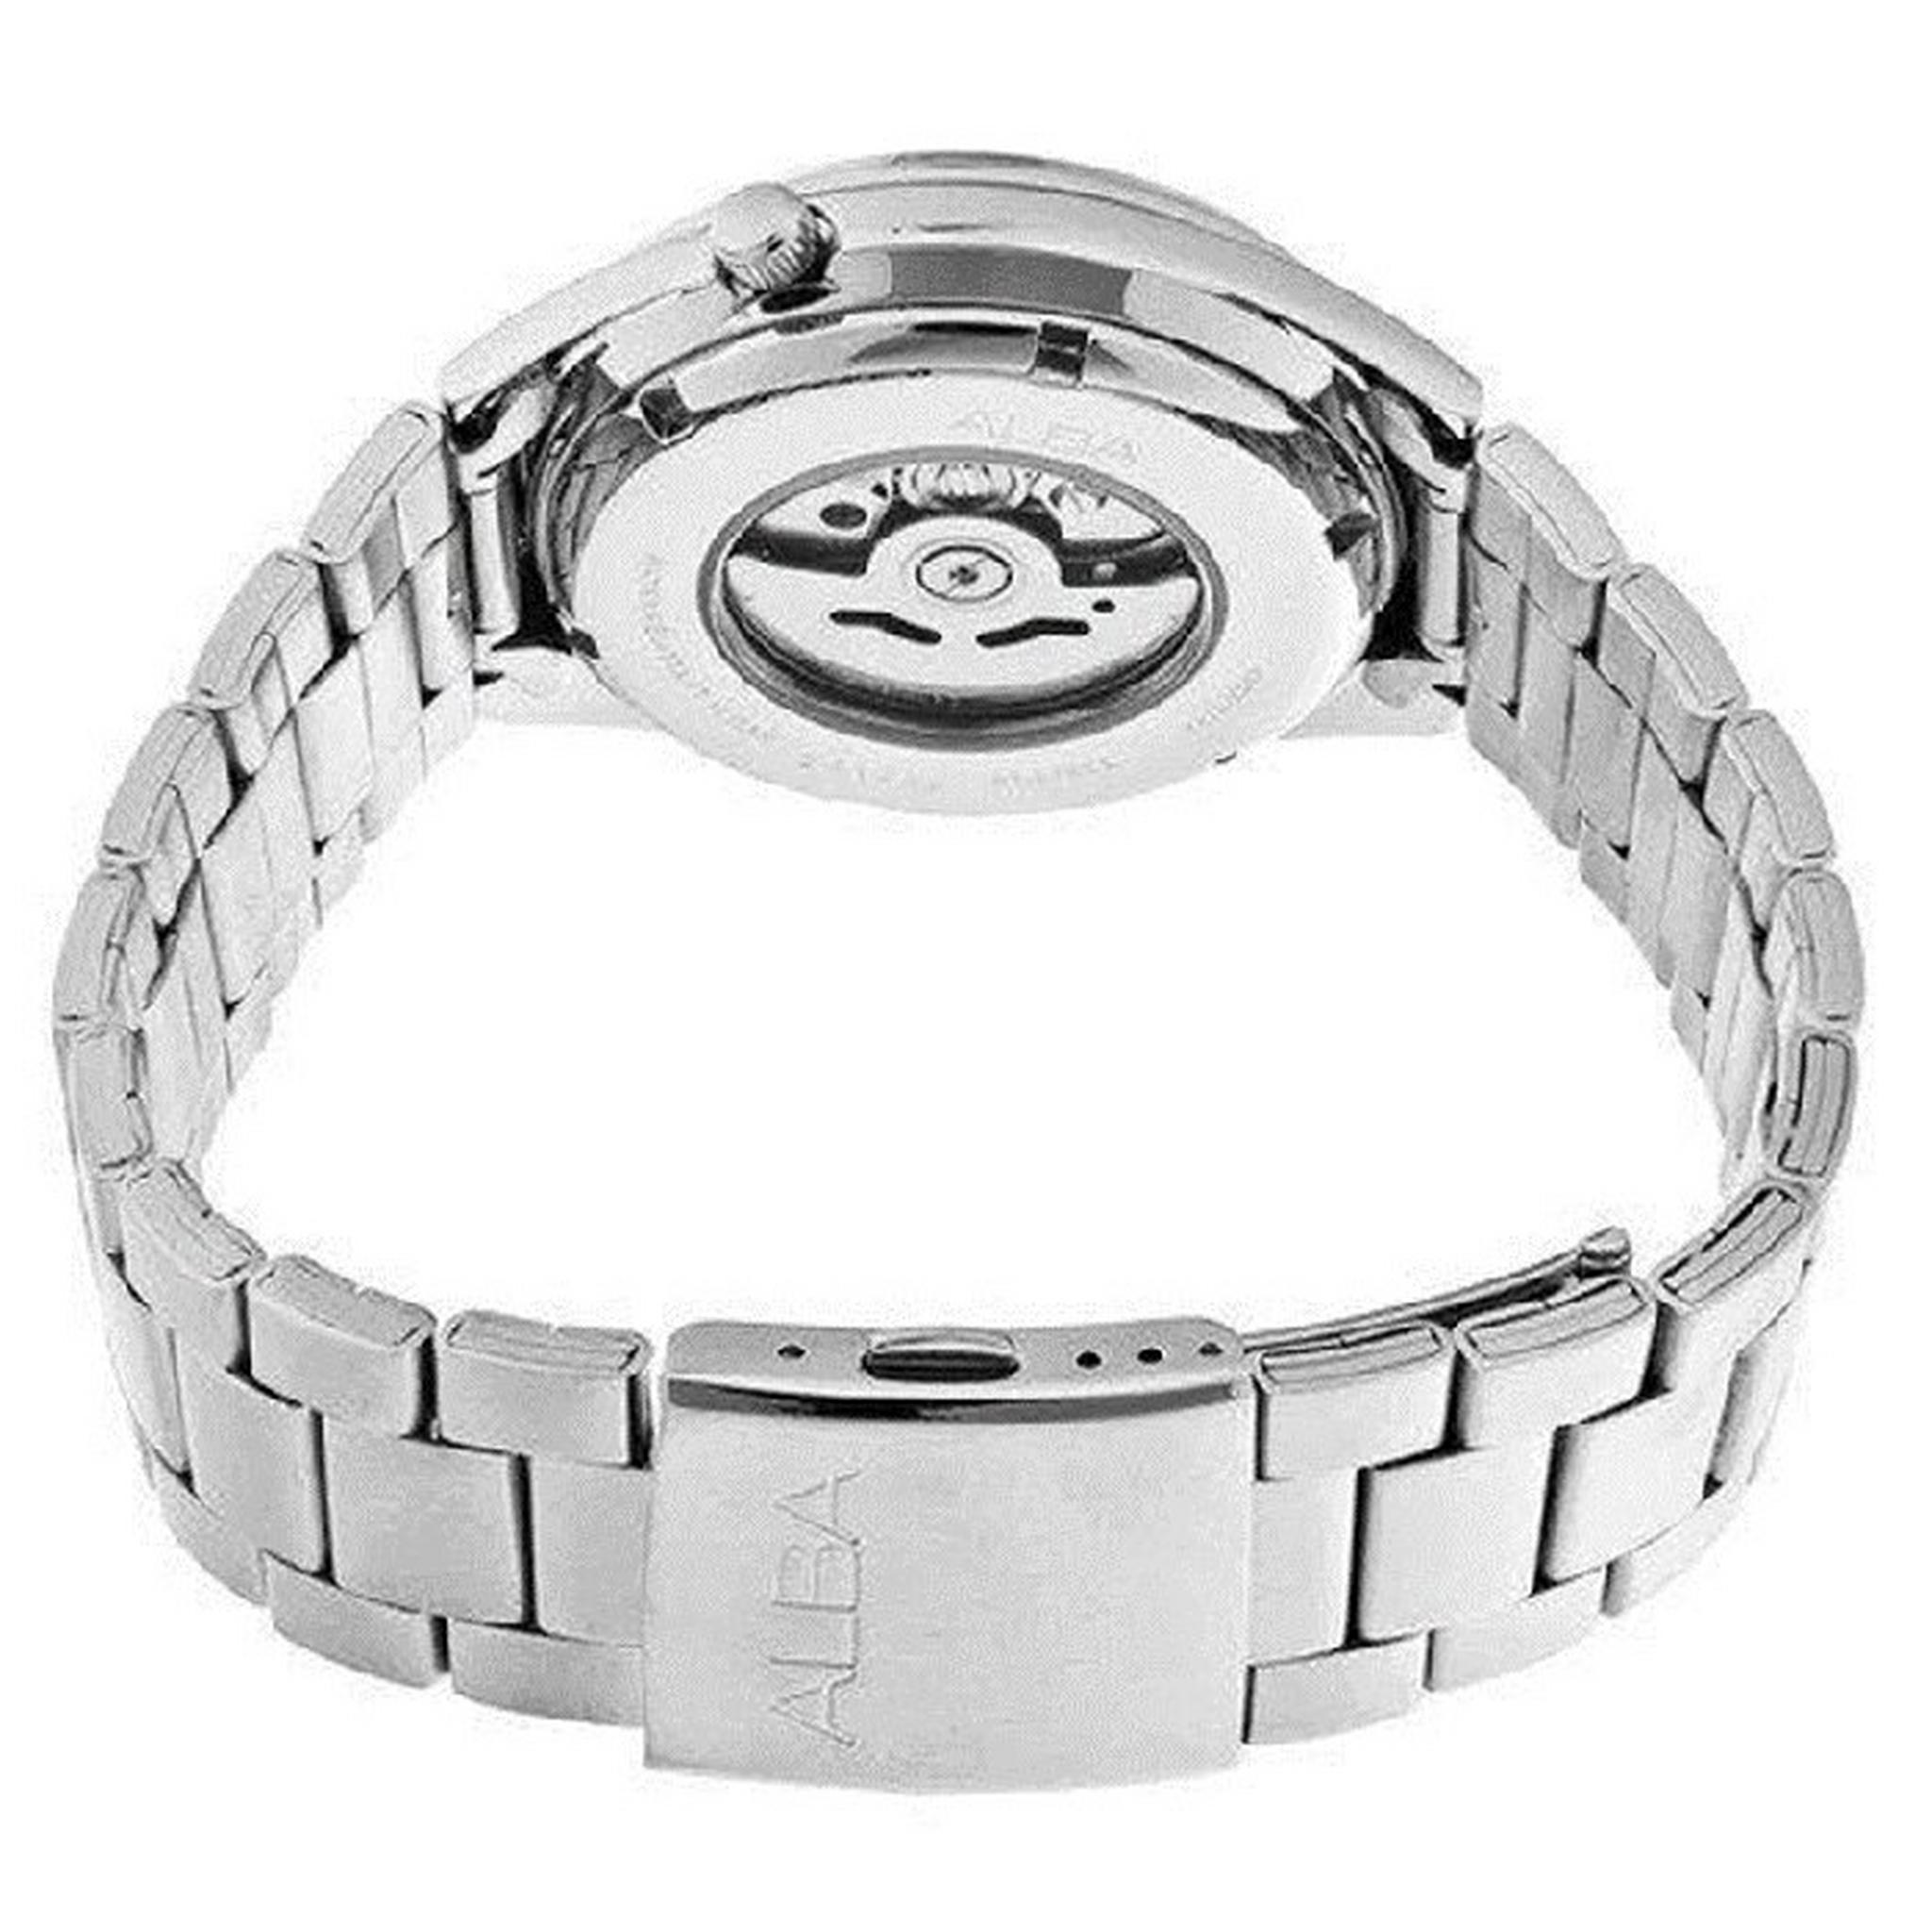 Alba Watch for Men, Analog, Stainless Steel, AL4325X1 - Silver